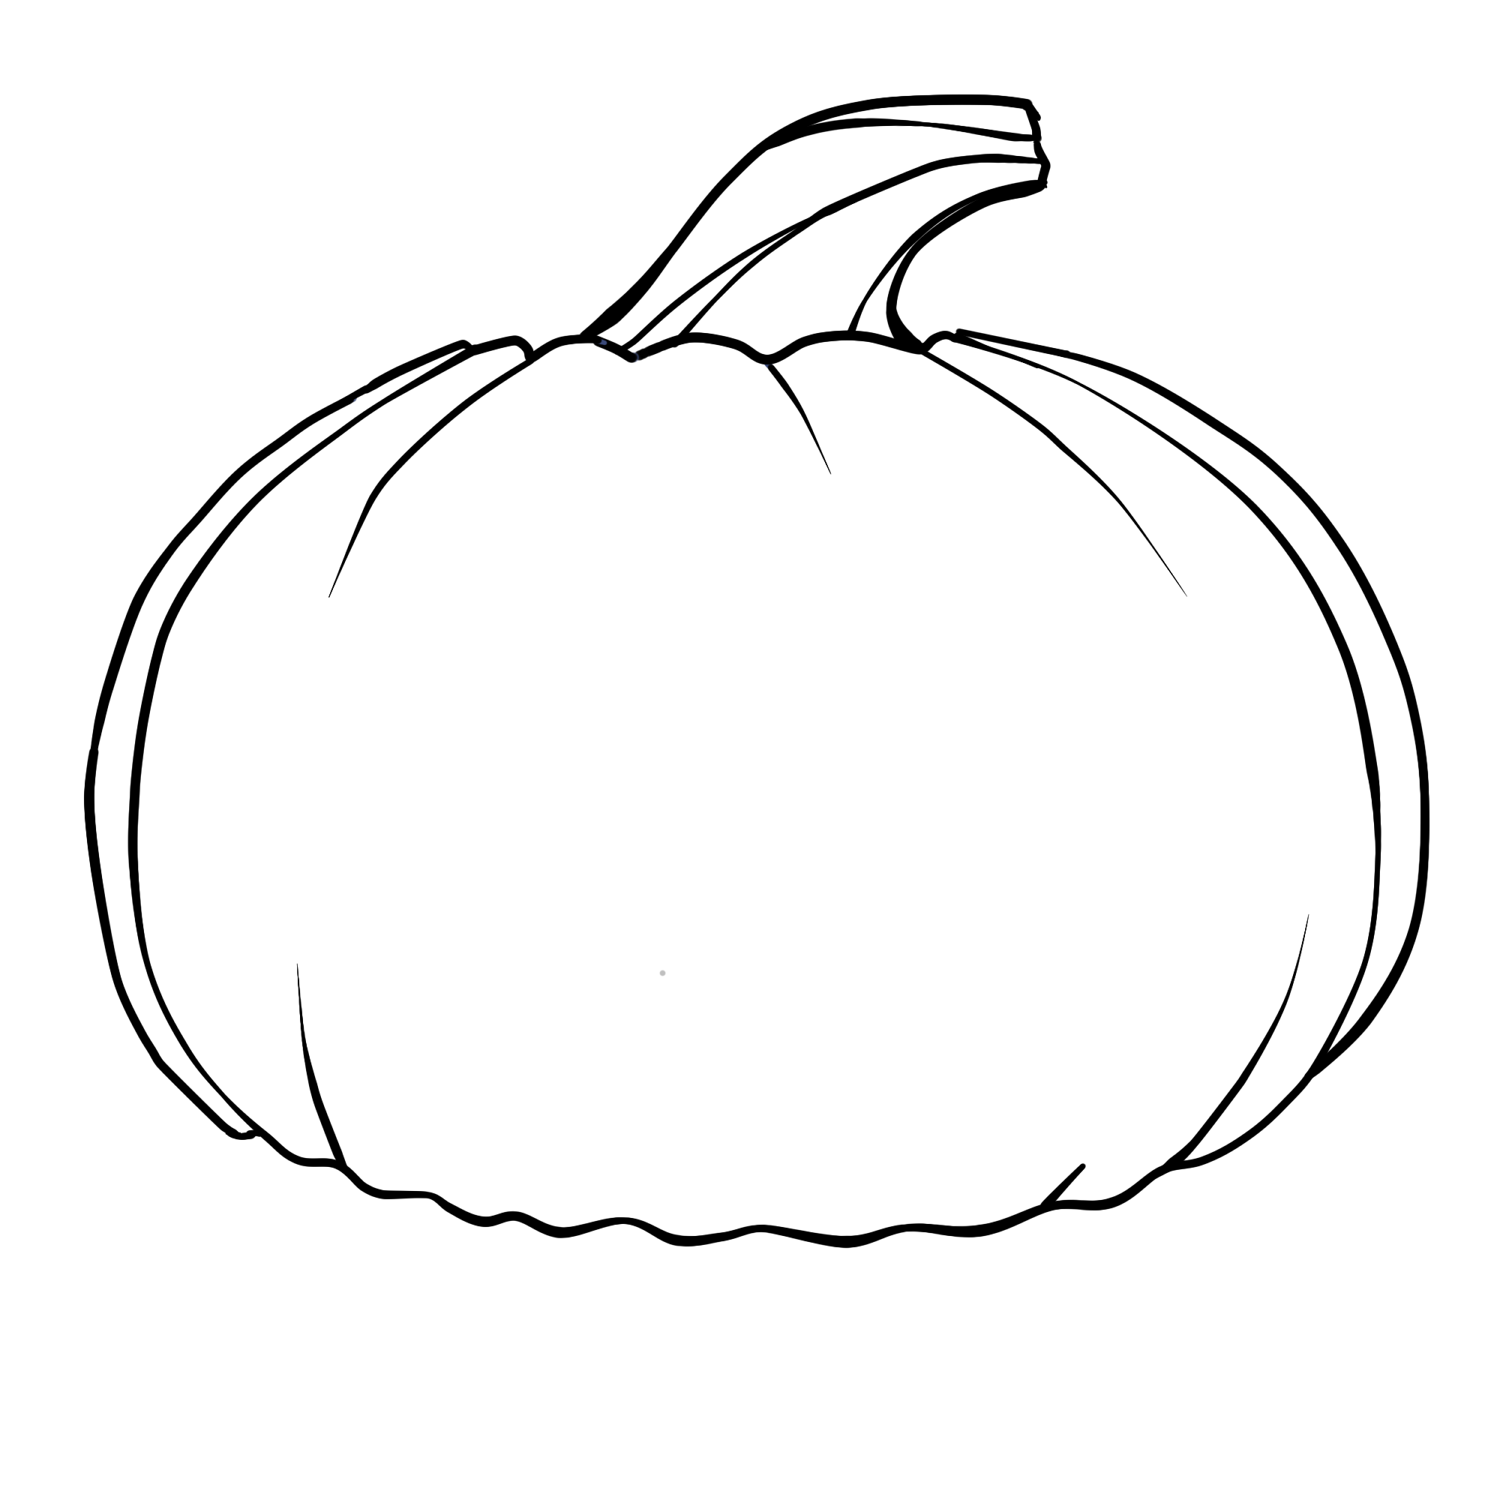 Free Outline Of A Pumpkin Download Free Outline Of A Pumpkin png